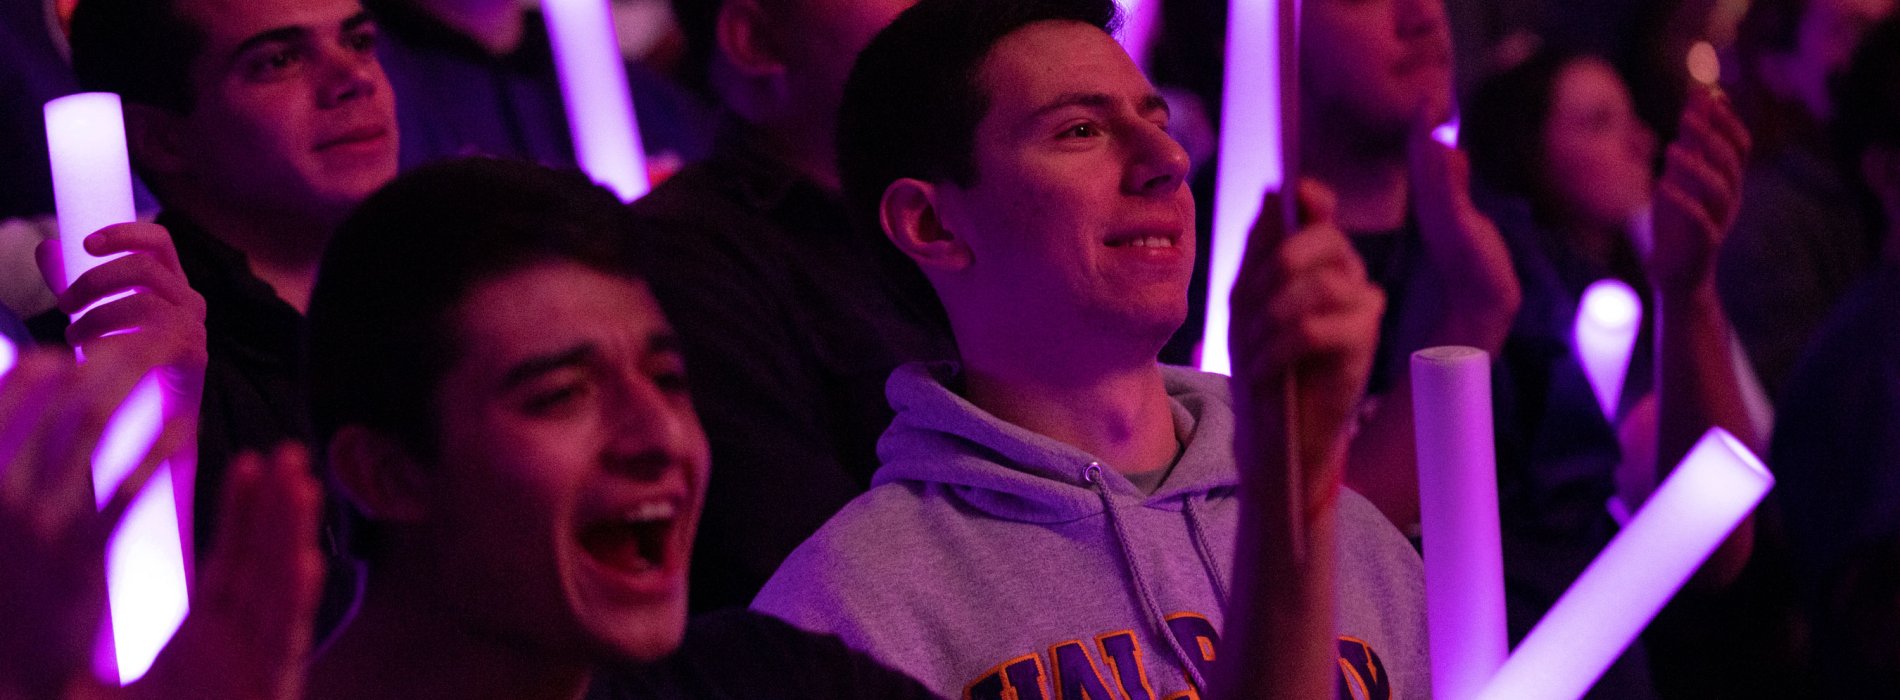 Students hold purple glow sticks as they stand and cheer for a UAlbany team.